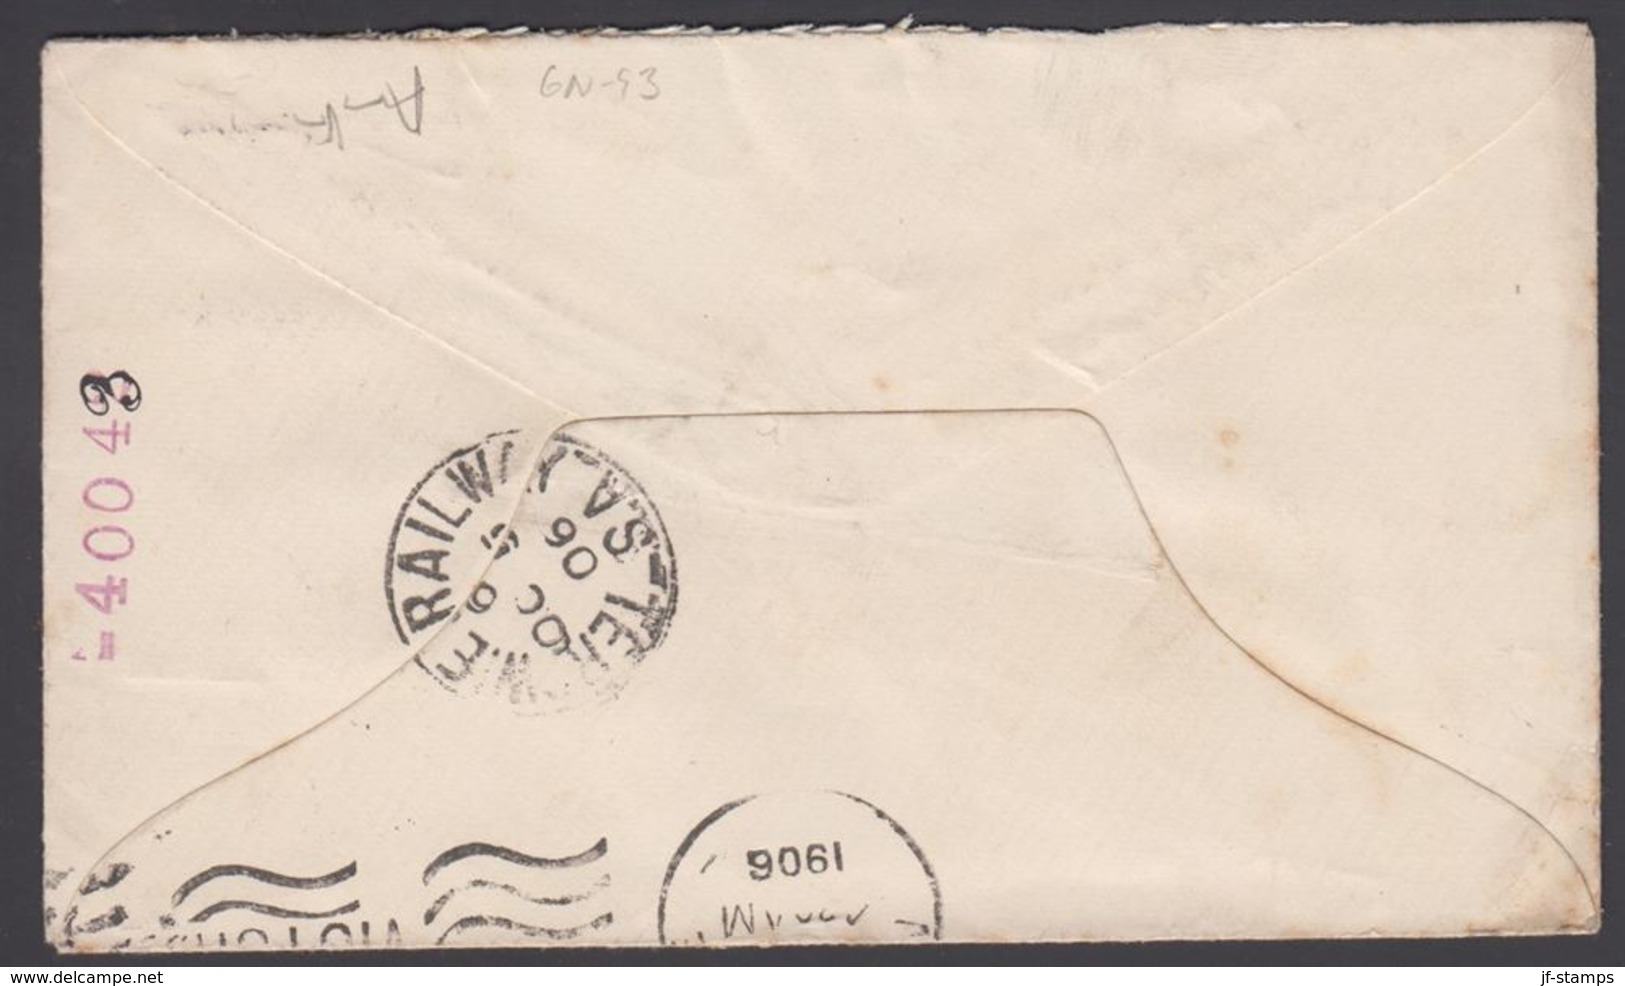 1906. SOUTH AUSTRALIA AUSTRALIA  TWO PENCE VICTORIA To Melbourne OCT - 8 1906. (MICHEL 81) - JF304912 - Covers & Documents